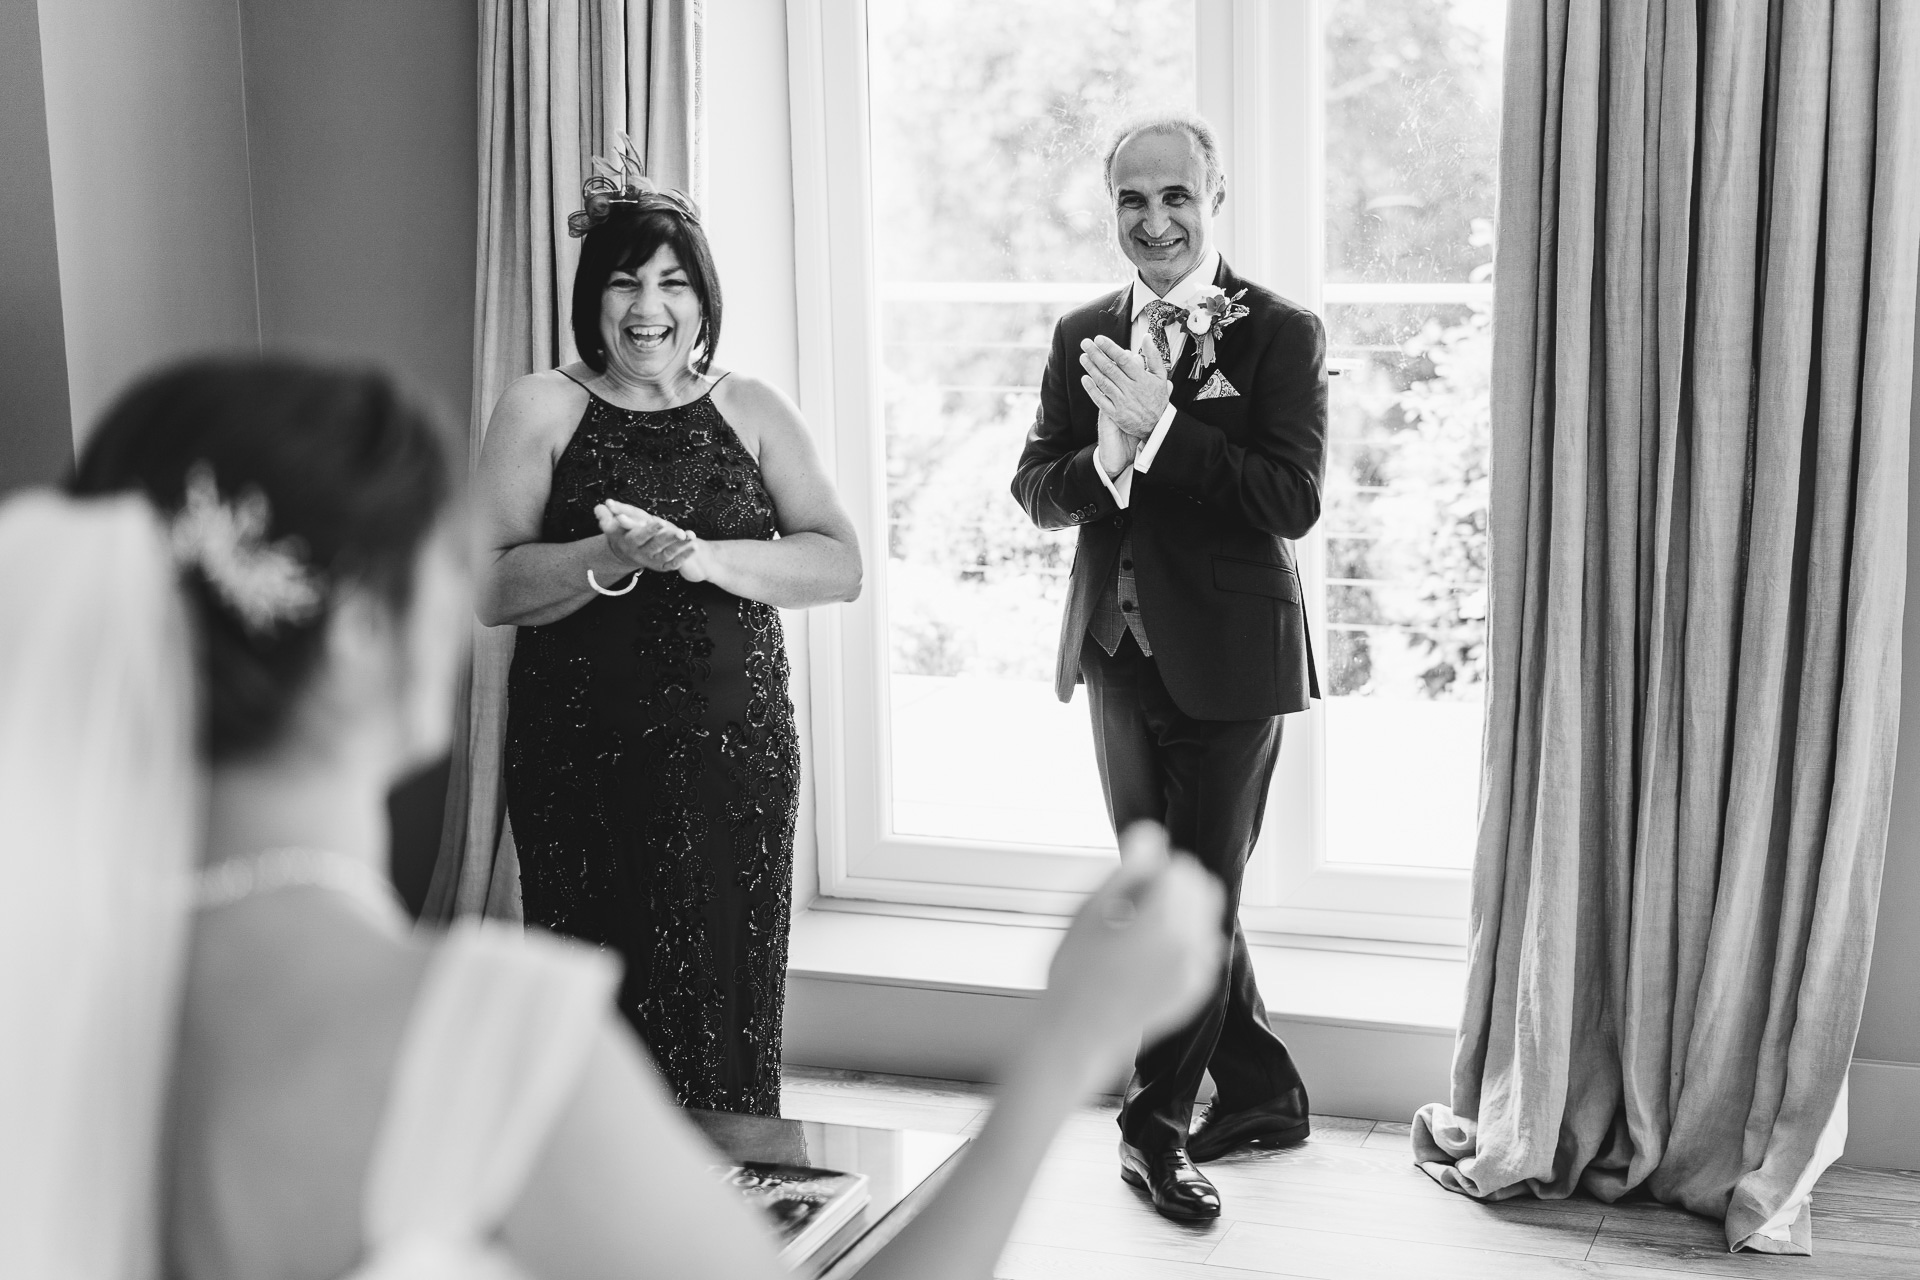 Parents of a bride clapping at her in wedding dress